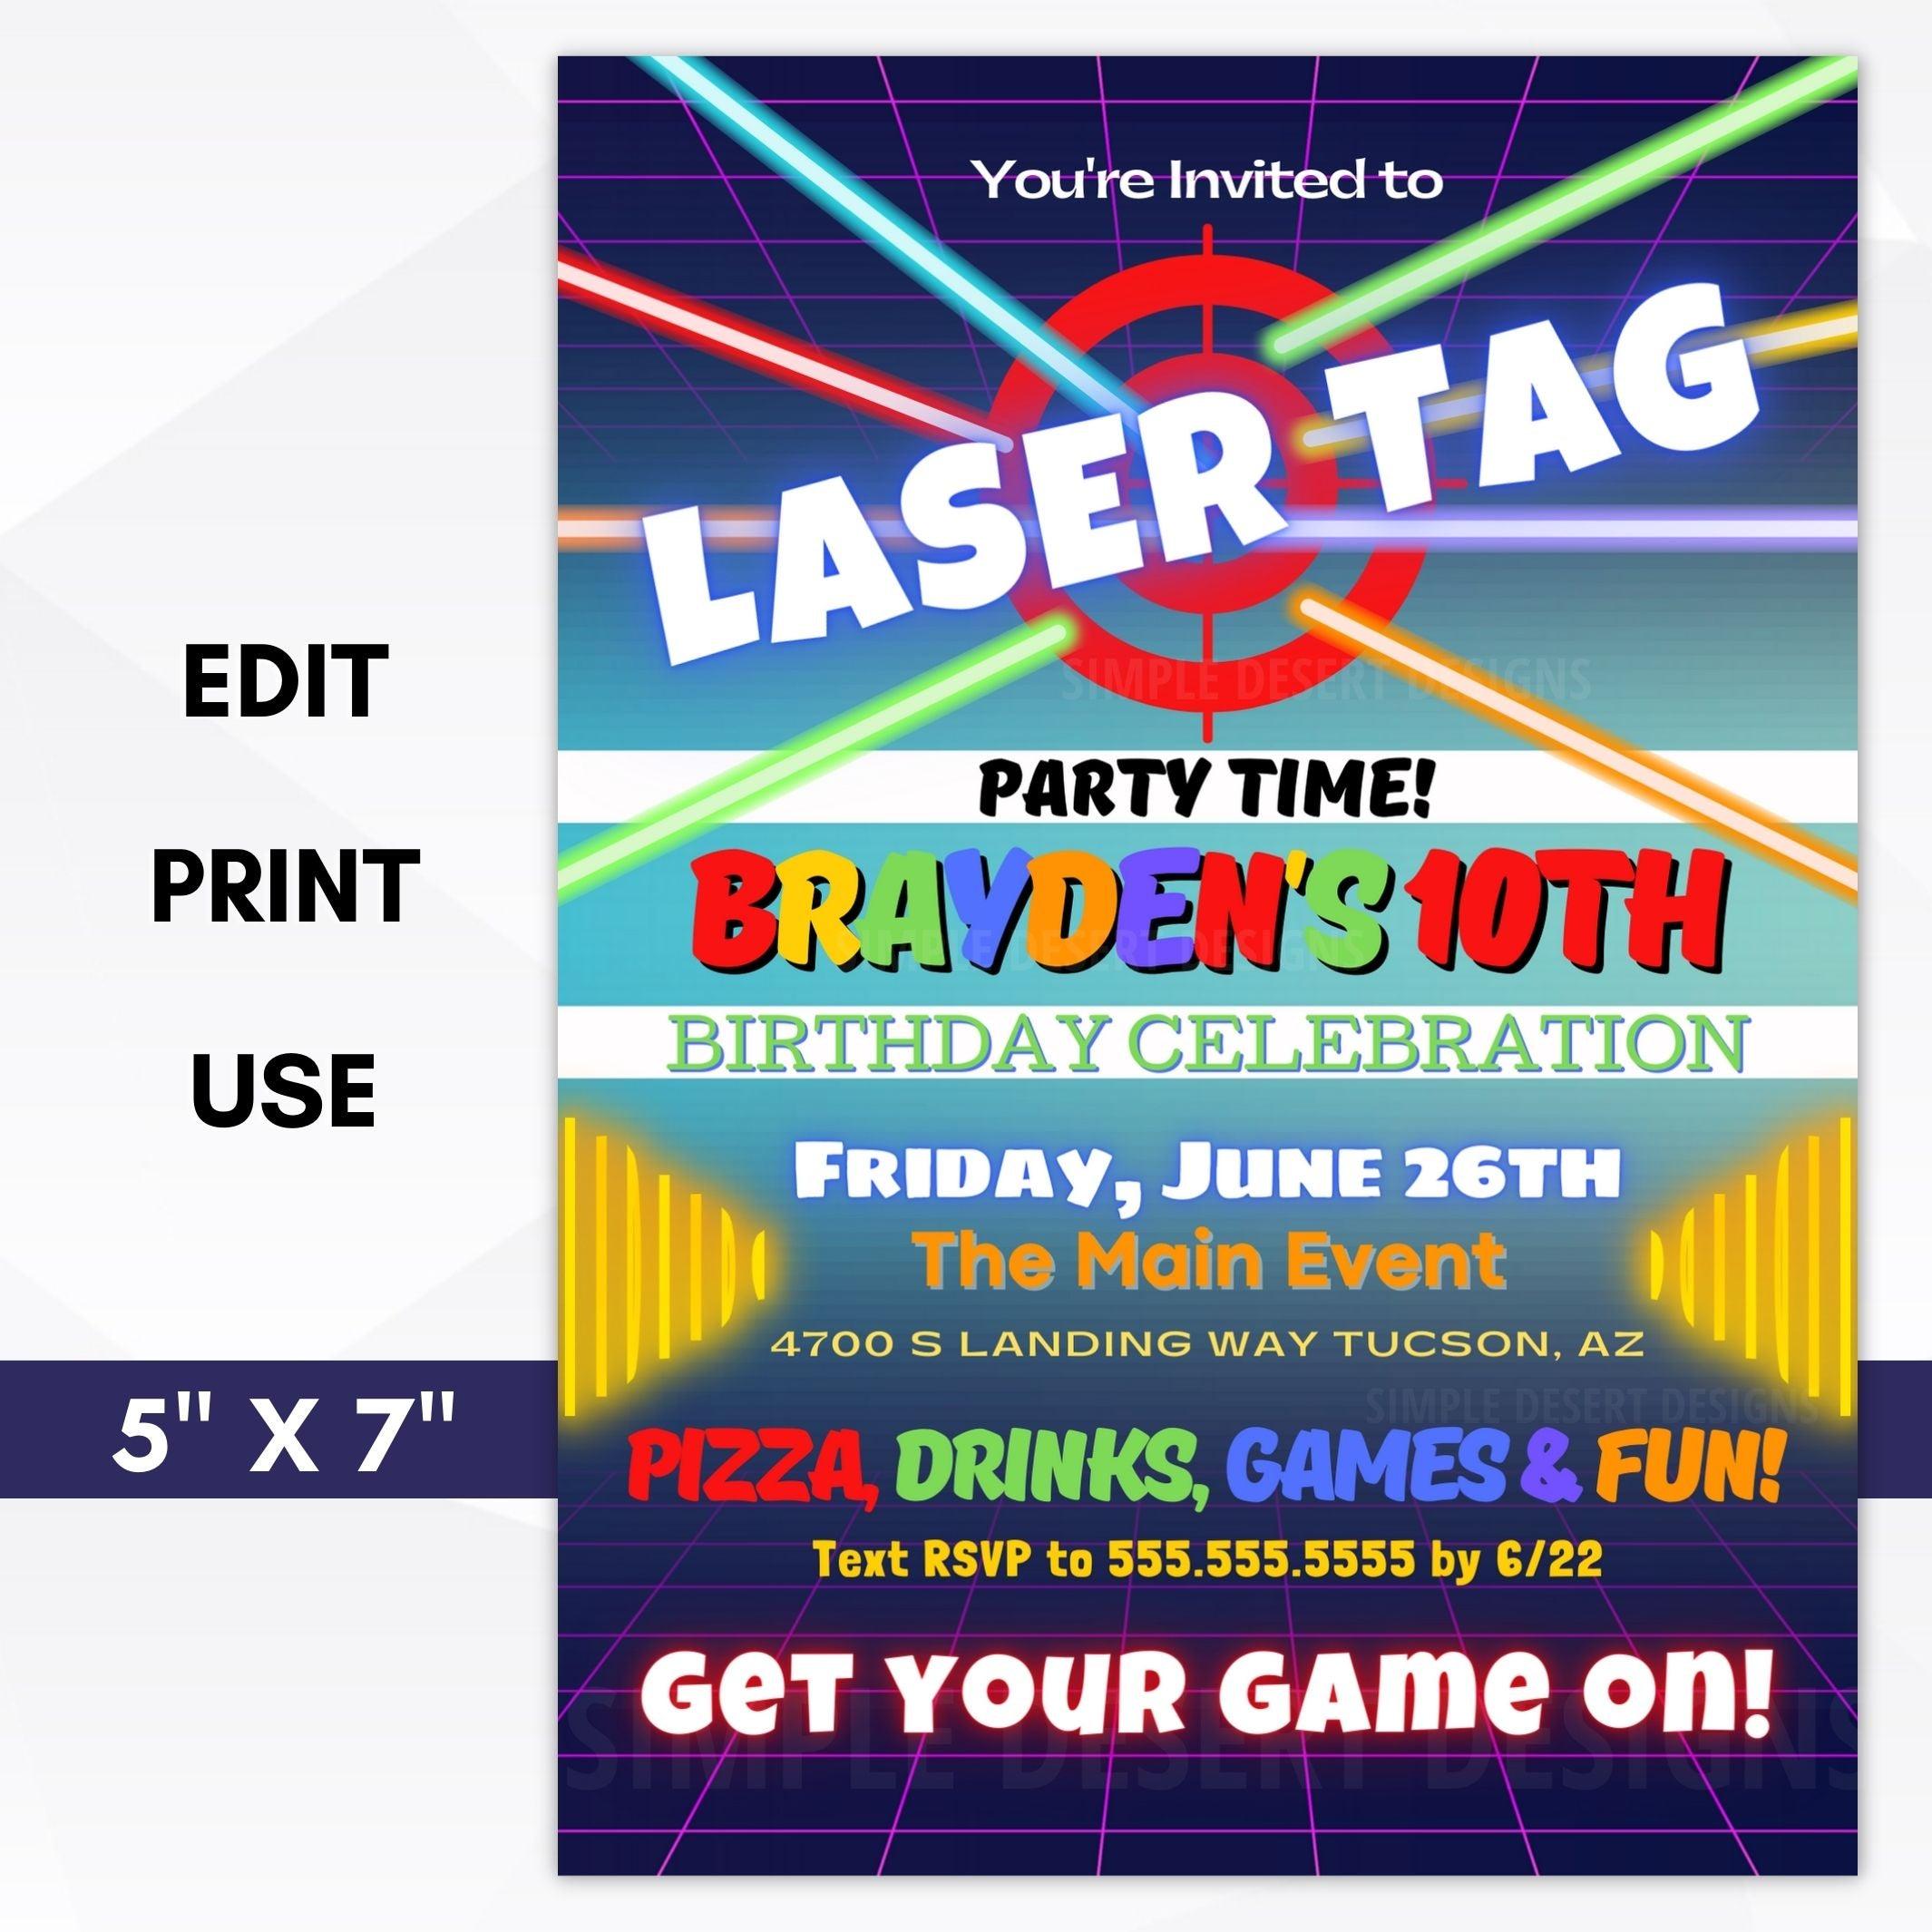 Laser Tag Near You!, Laser Tag Birthday Party